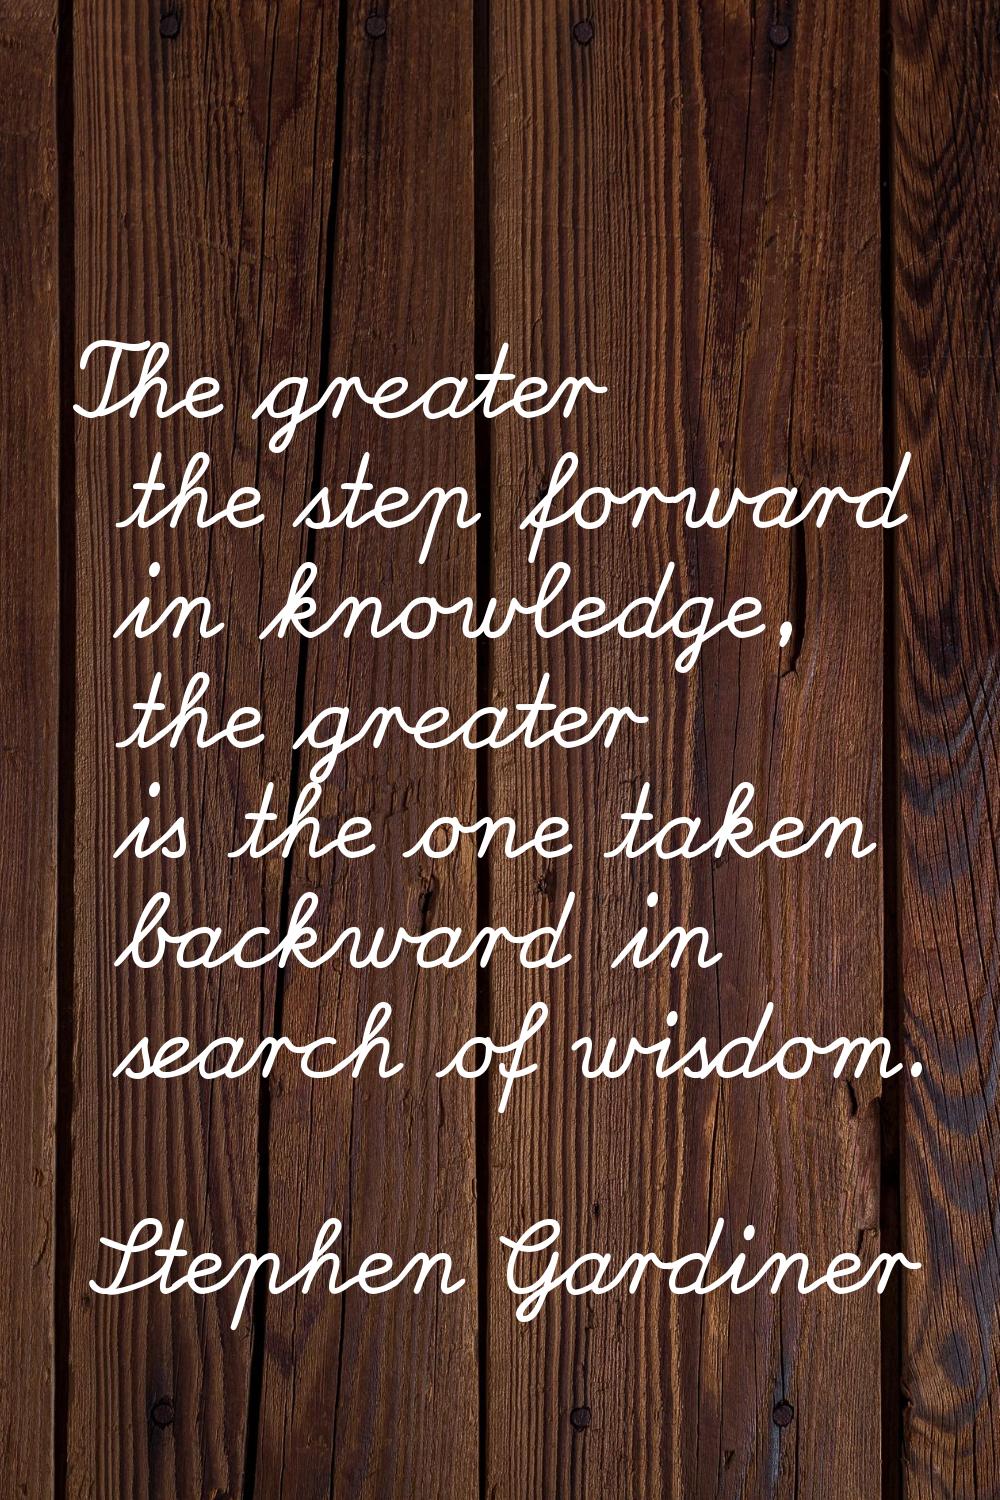 The greater the step forward in knowledge, the greater is the one taken backward in search of wisdo